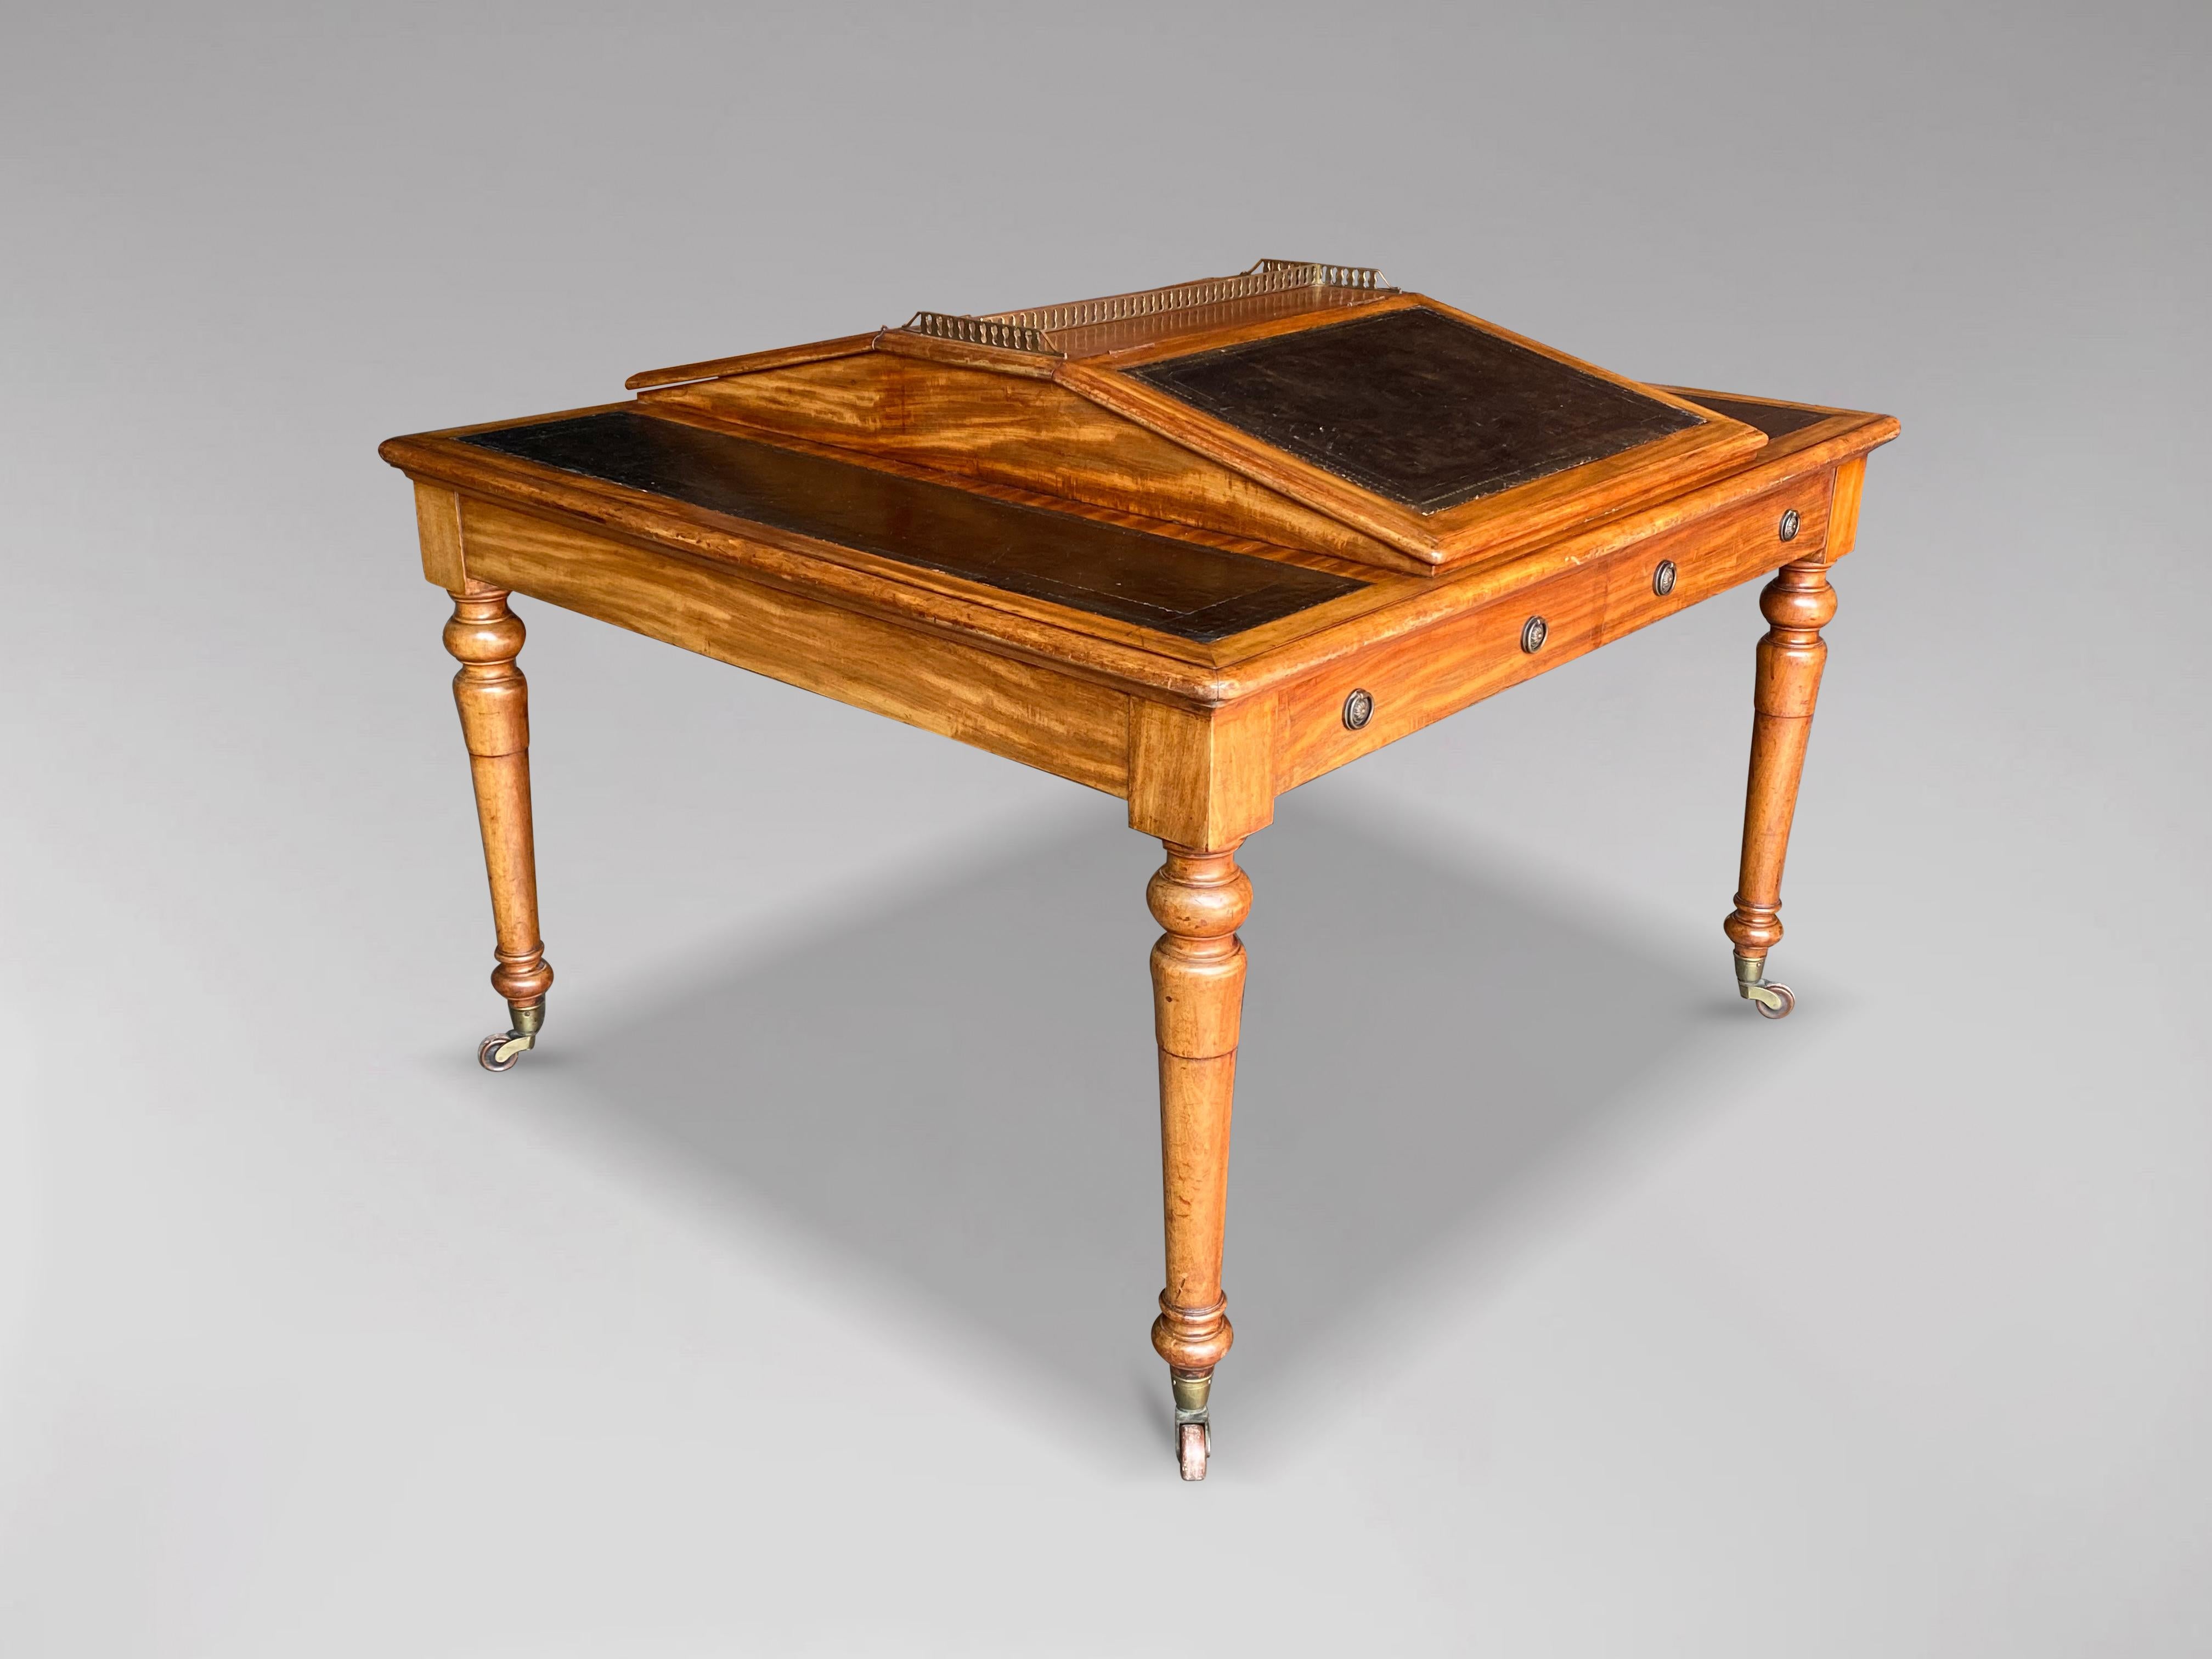 A fine late 19th century, Victorian period mahogany partners writing table with unusual features such as a moulded rectangular top with two rising fall writing slopes in the centre topped by a brass galleried top, above two faux drawers on either